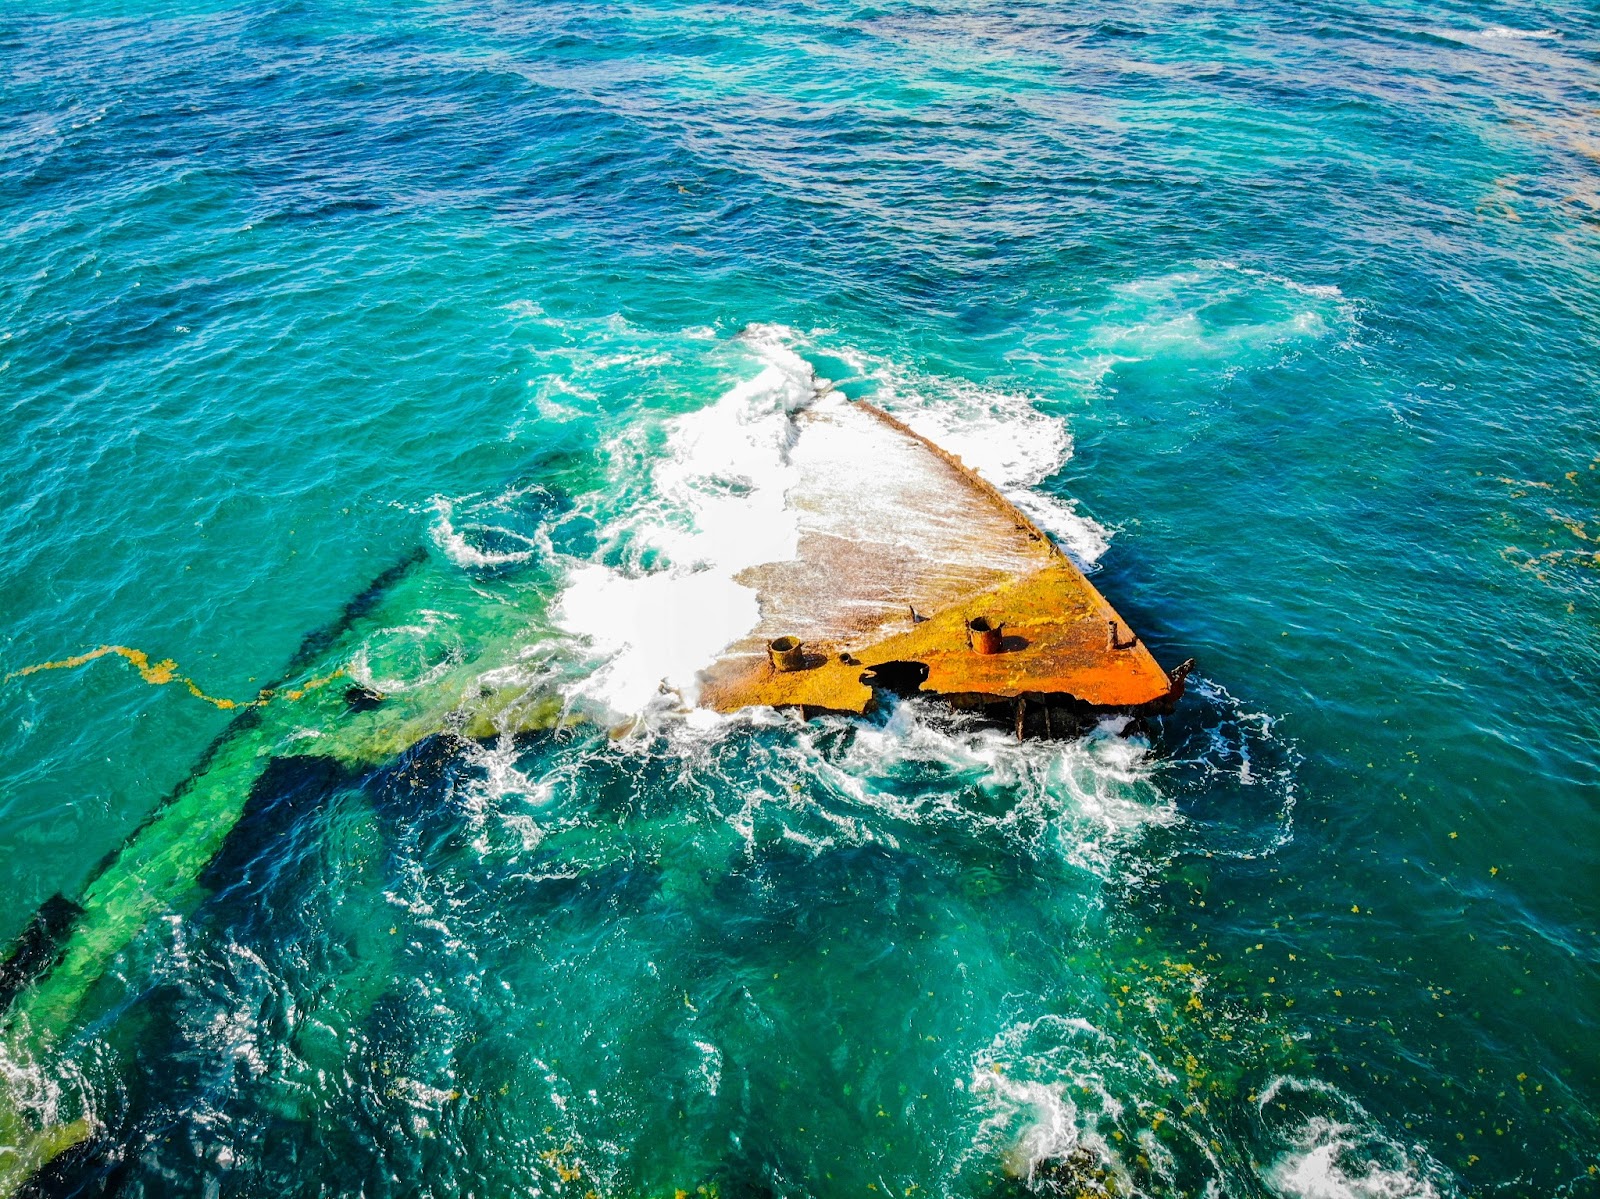 a ruined boat partially submerged underwater